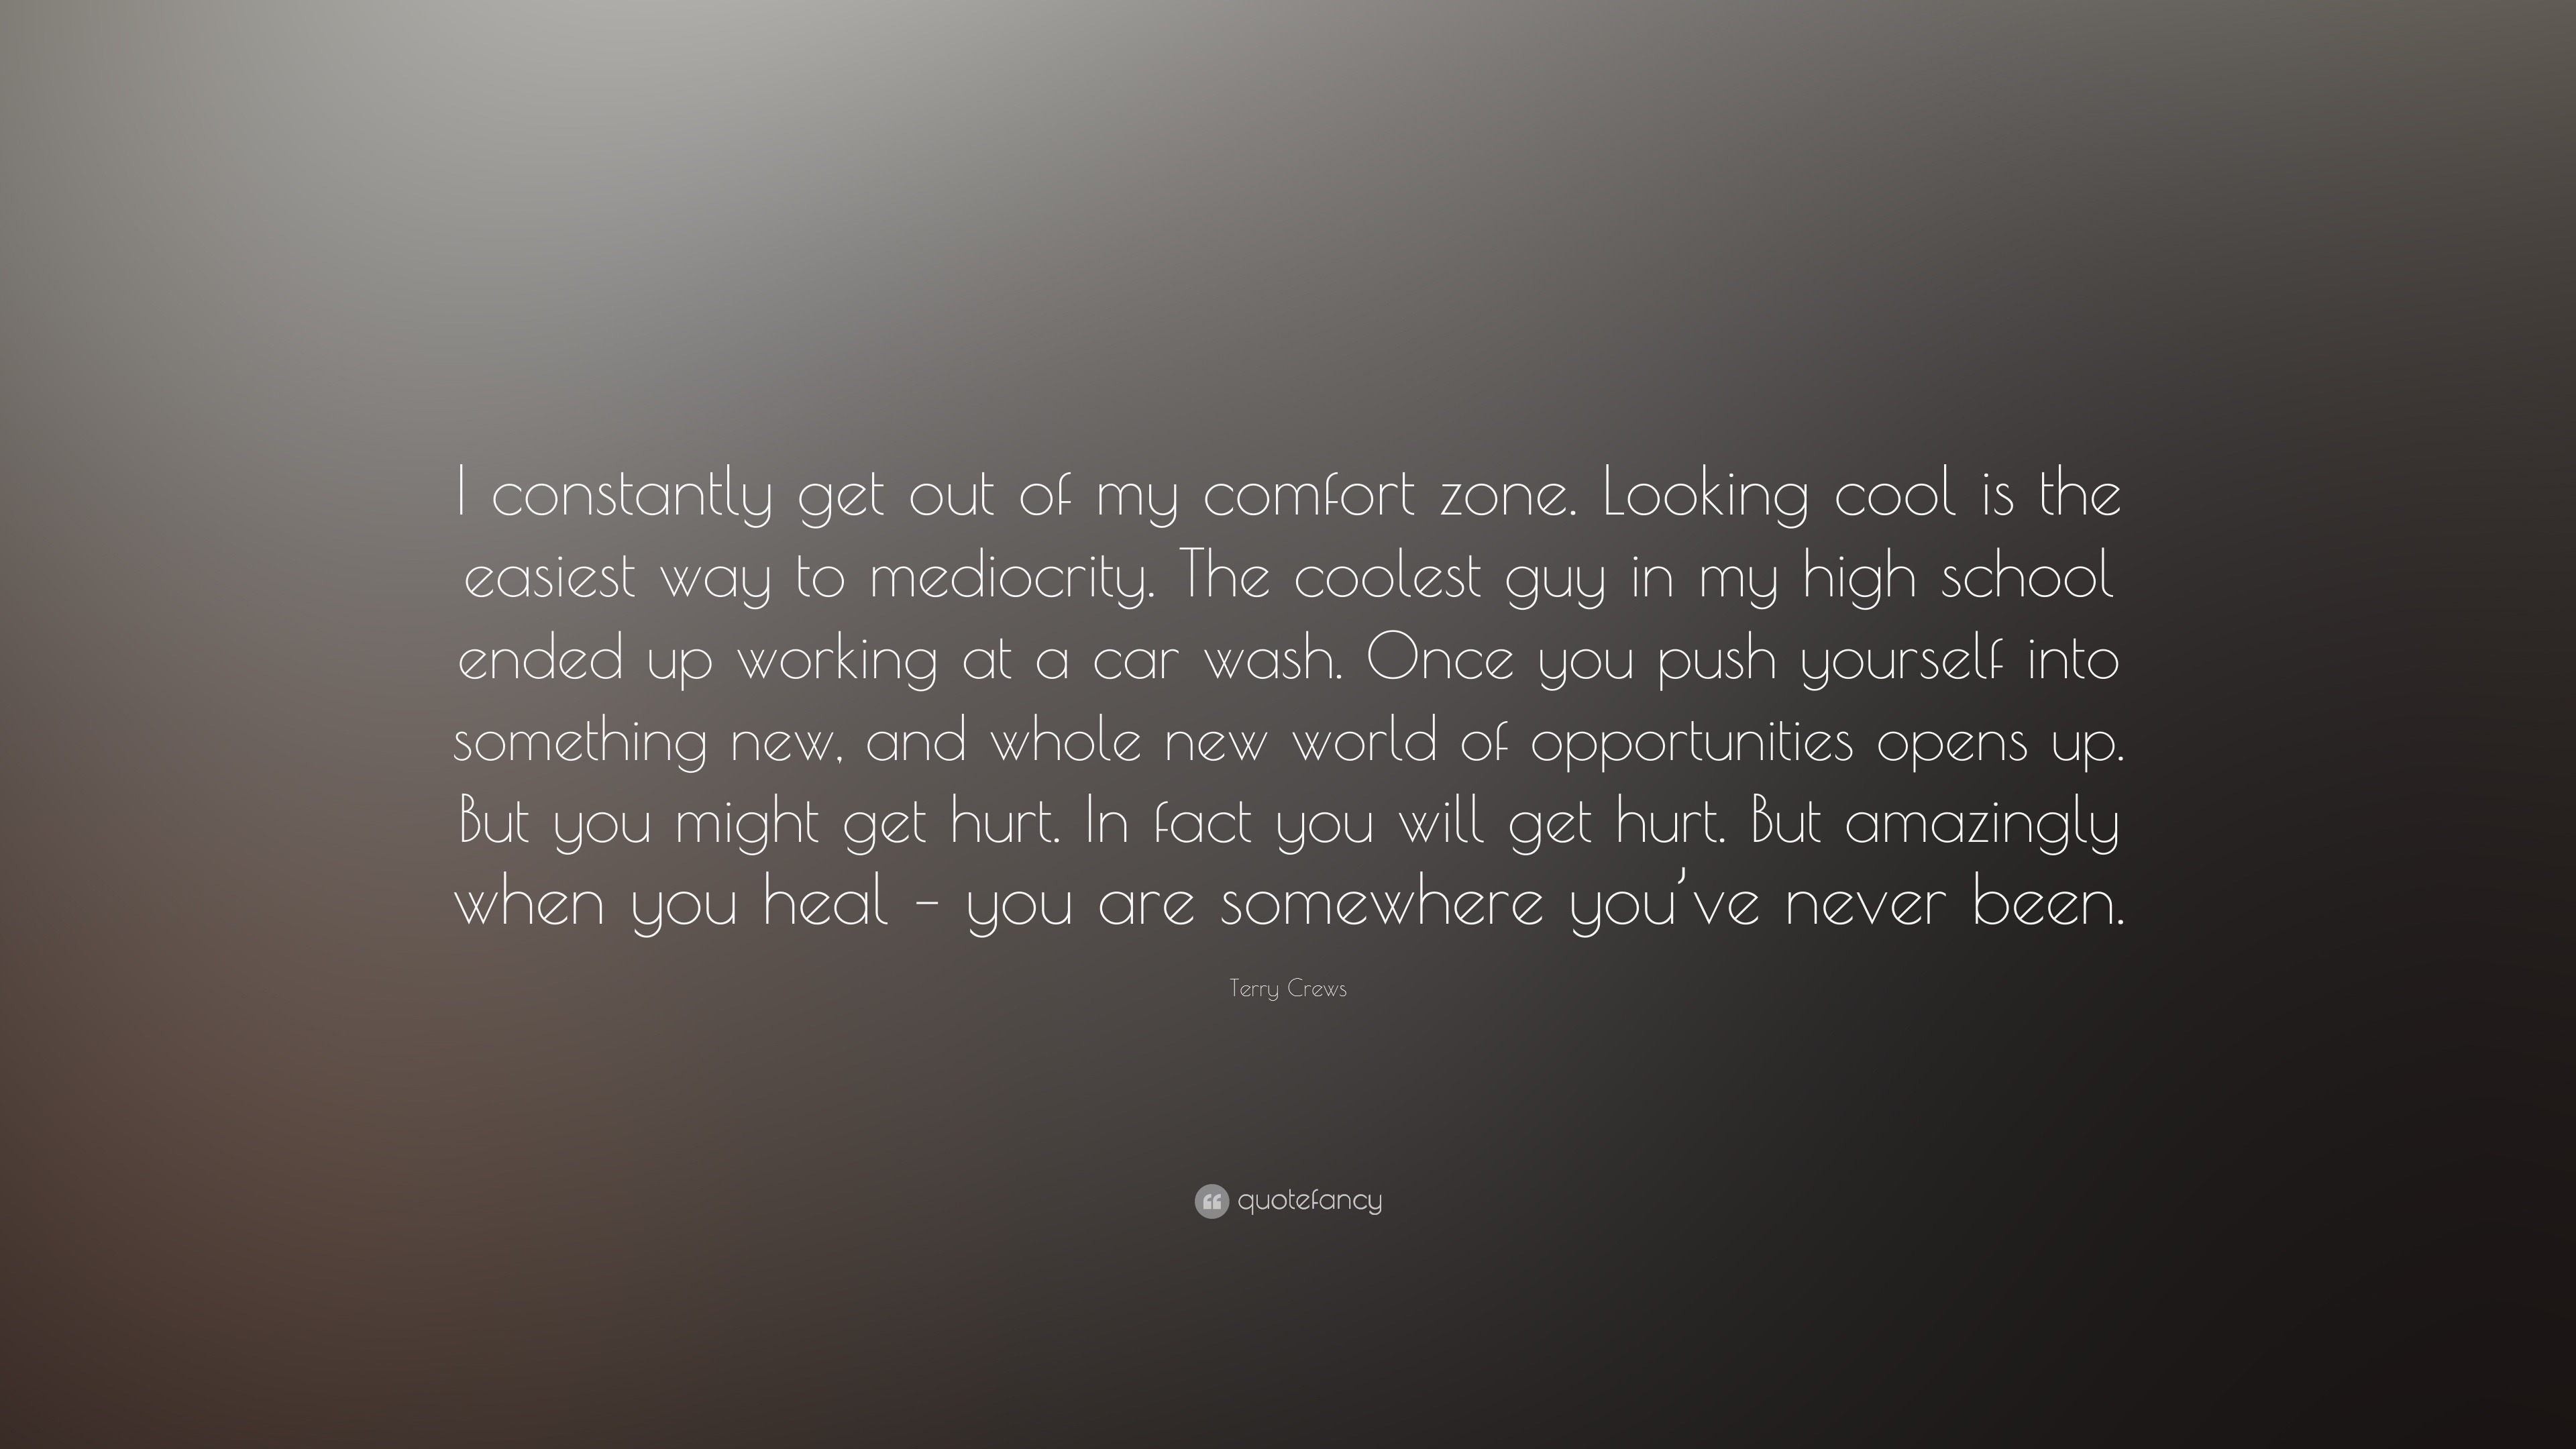 Terry Crews Quote I Constantly Get Out Of My Comfort Zone Looking Cool Is The Easiest Way To Mediocrity The Coolest Guy In My High Schoo 13 Wallpapers Quotefancy